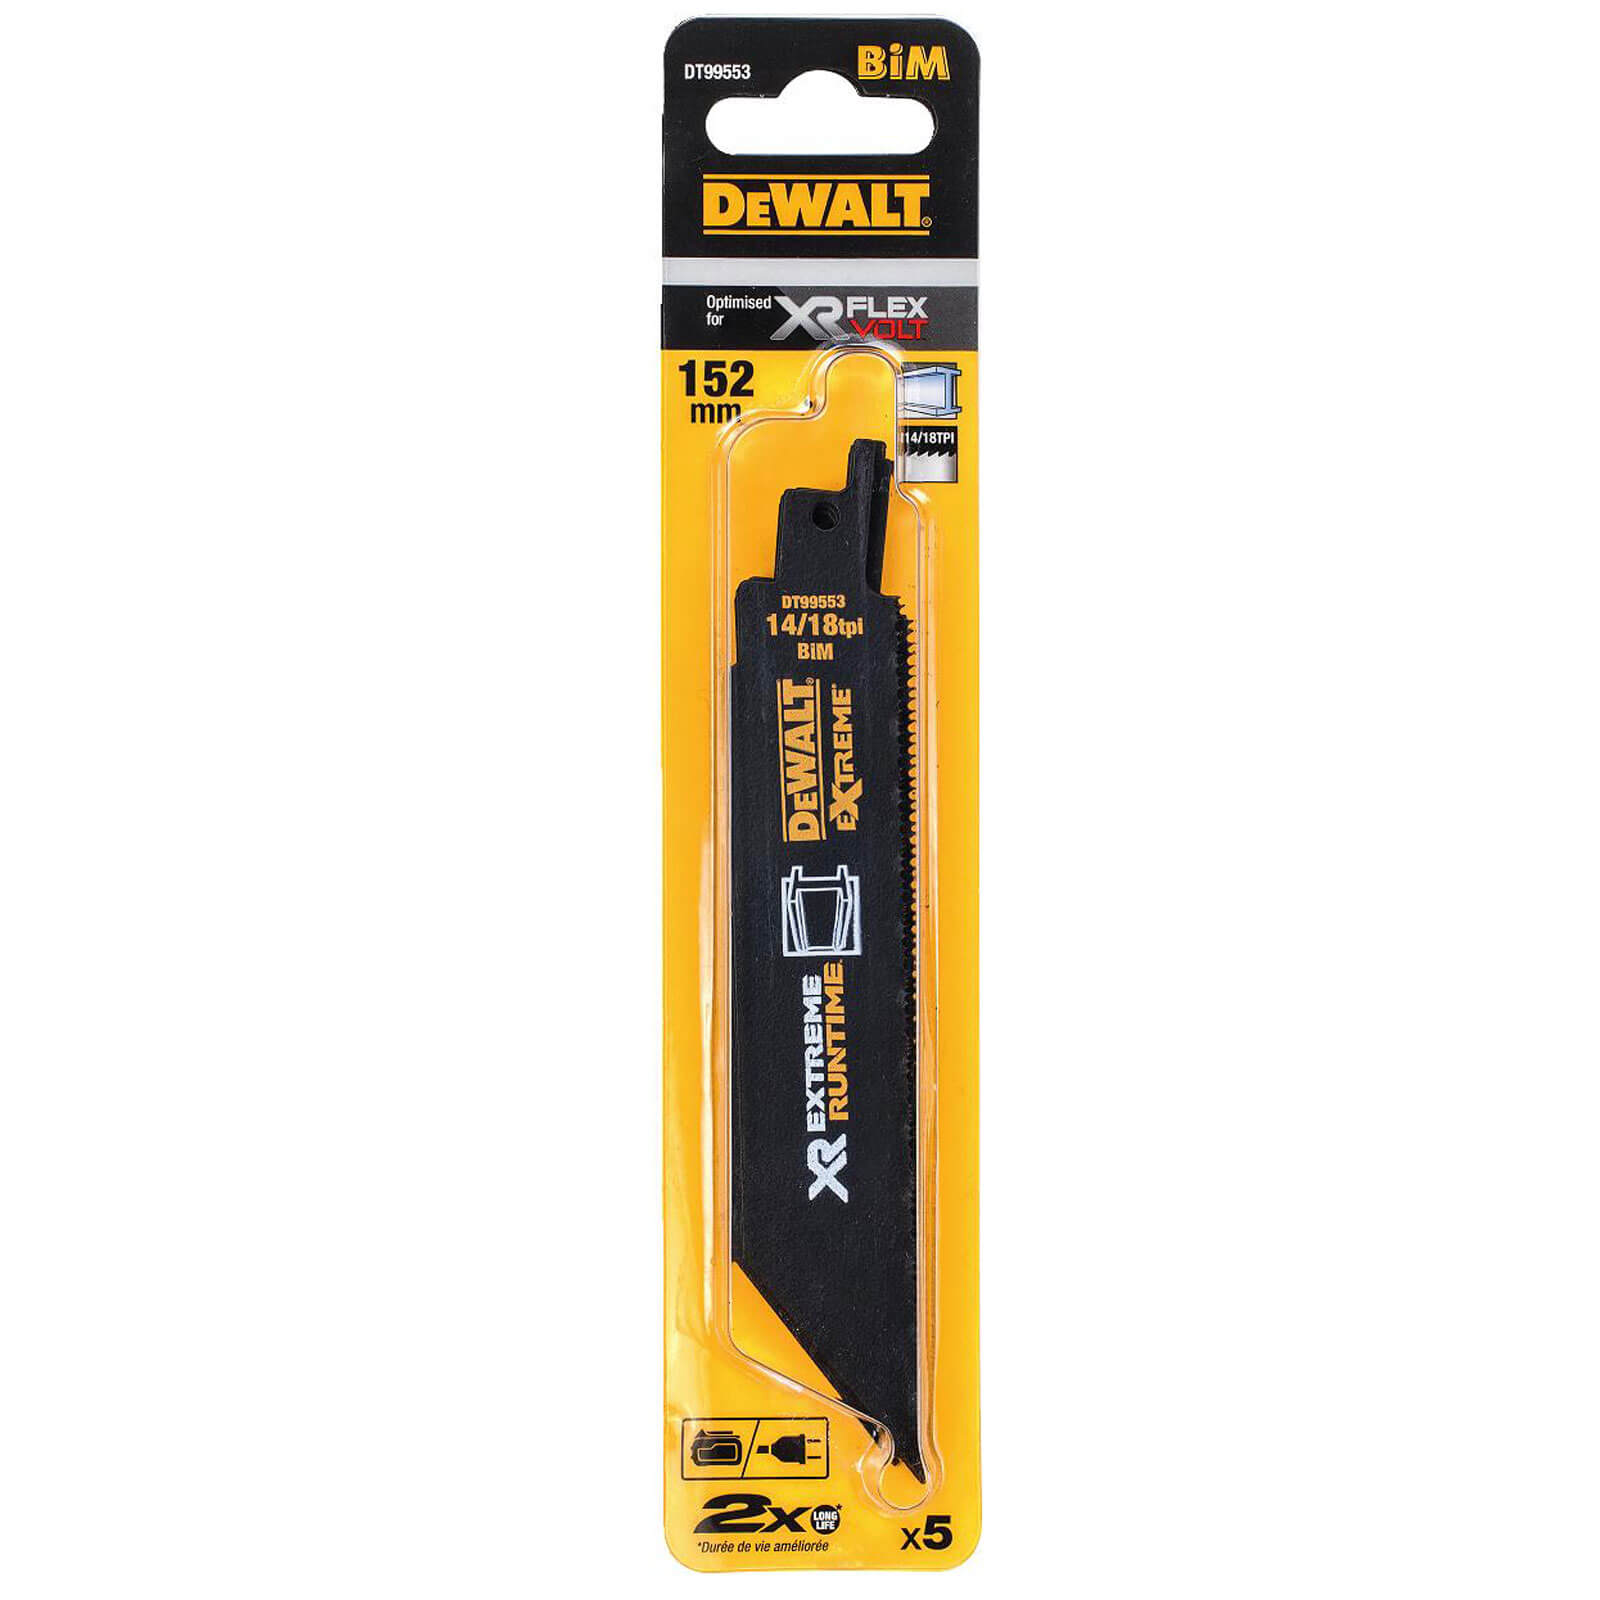 Image of DeWalt Extreme Runtime Metal Cutting Reciprocating Sabre Saw Blades 150mm Pack of 5